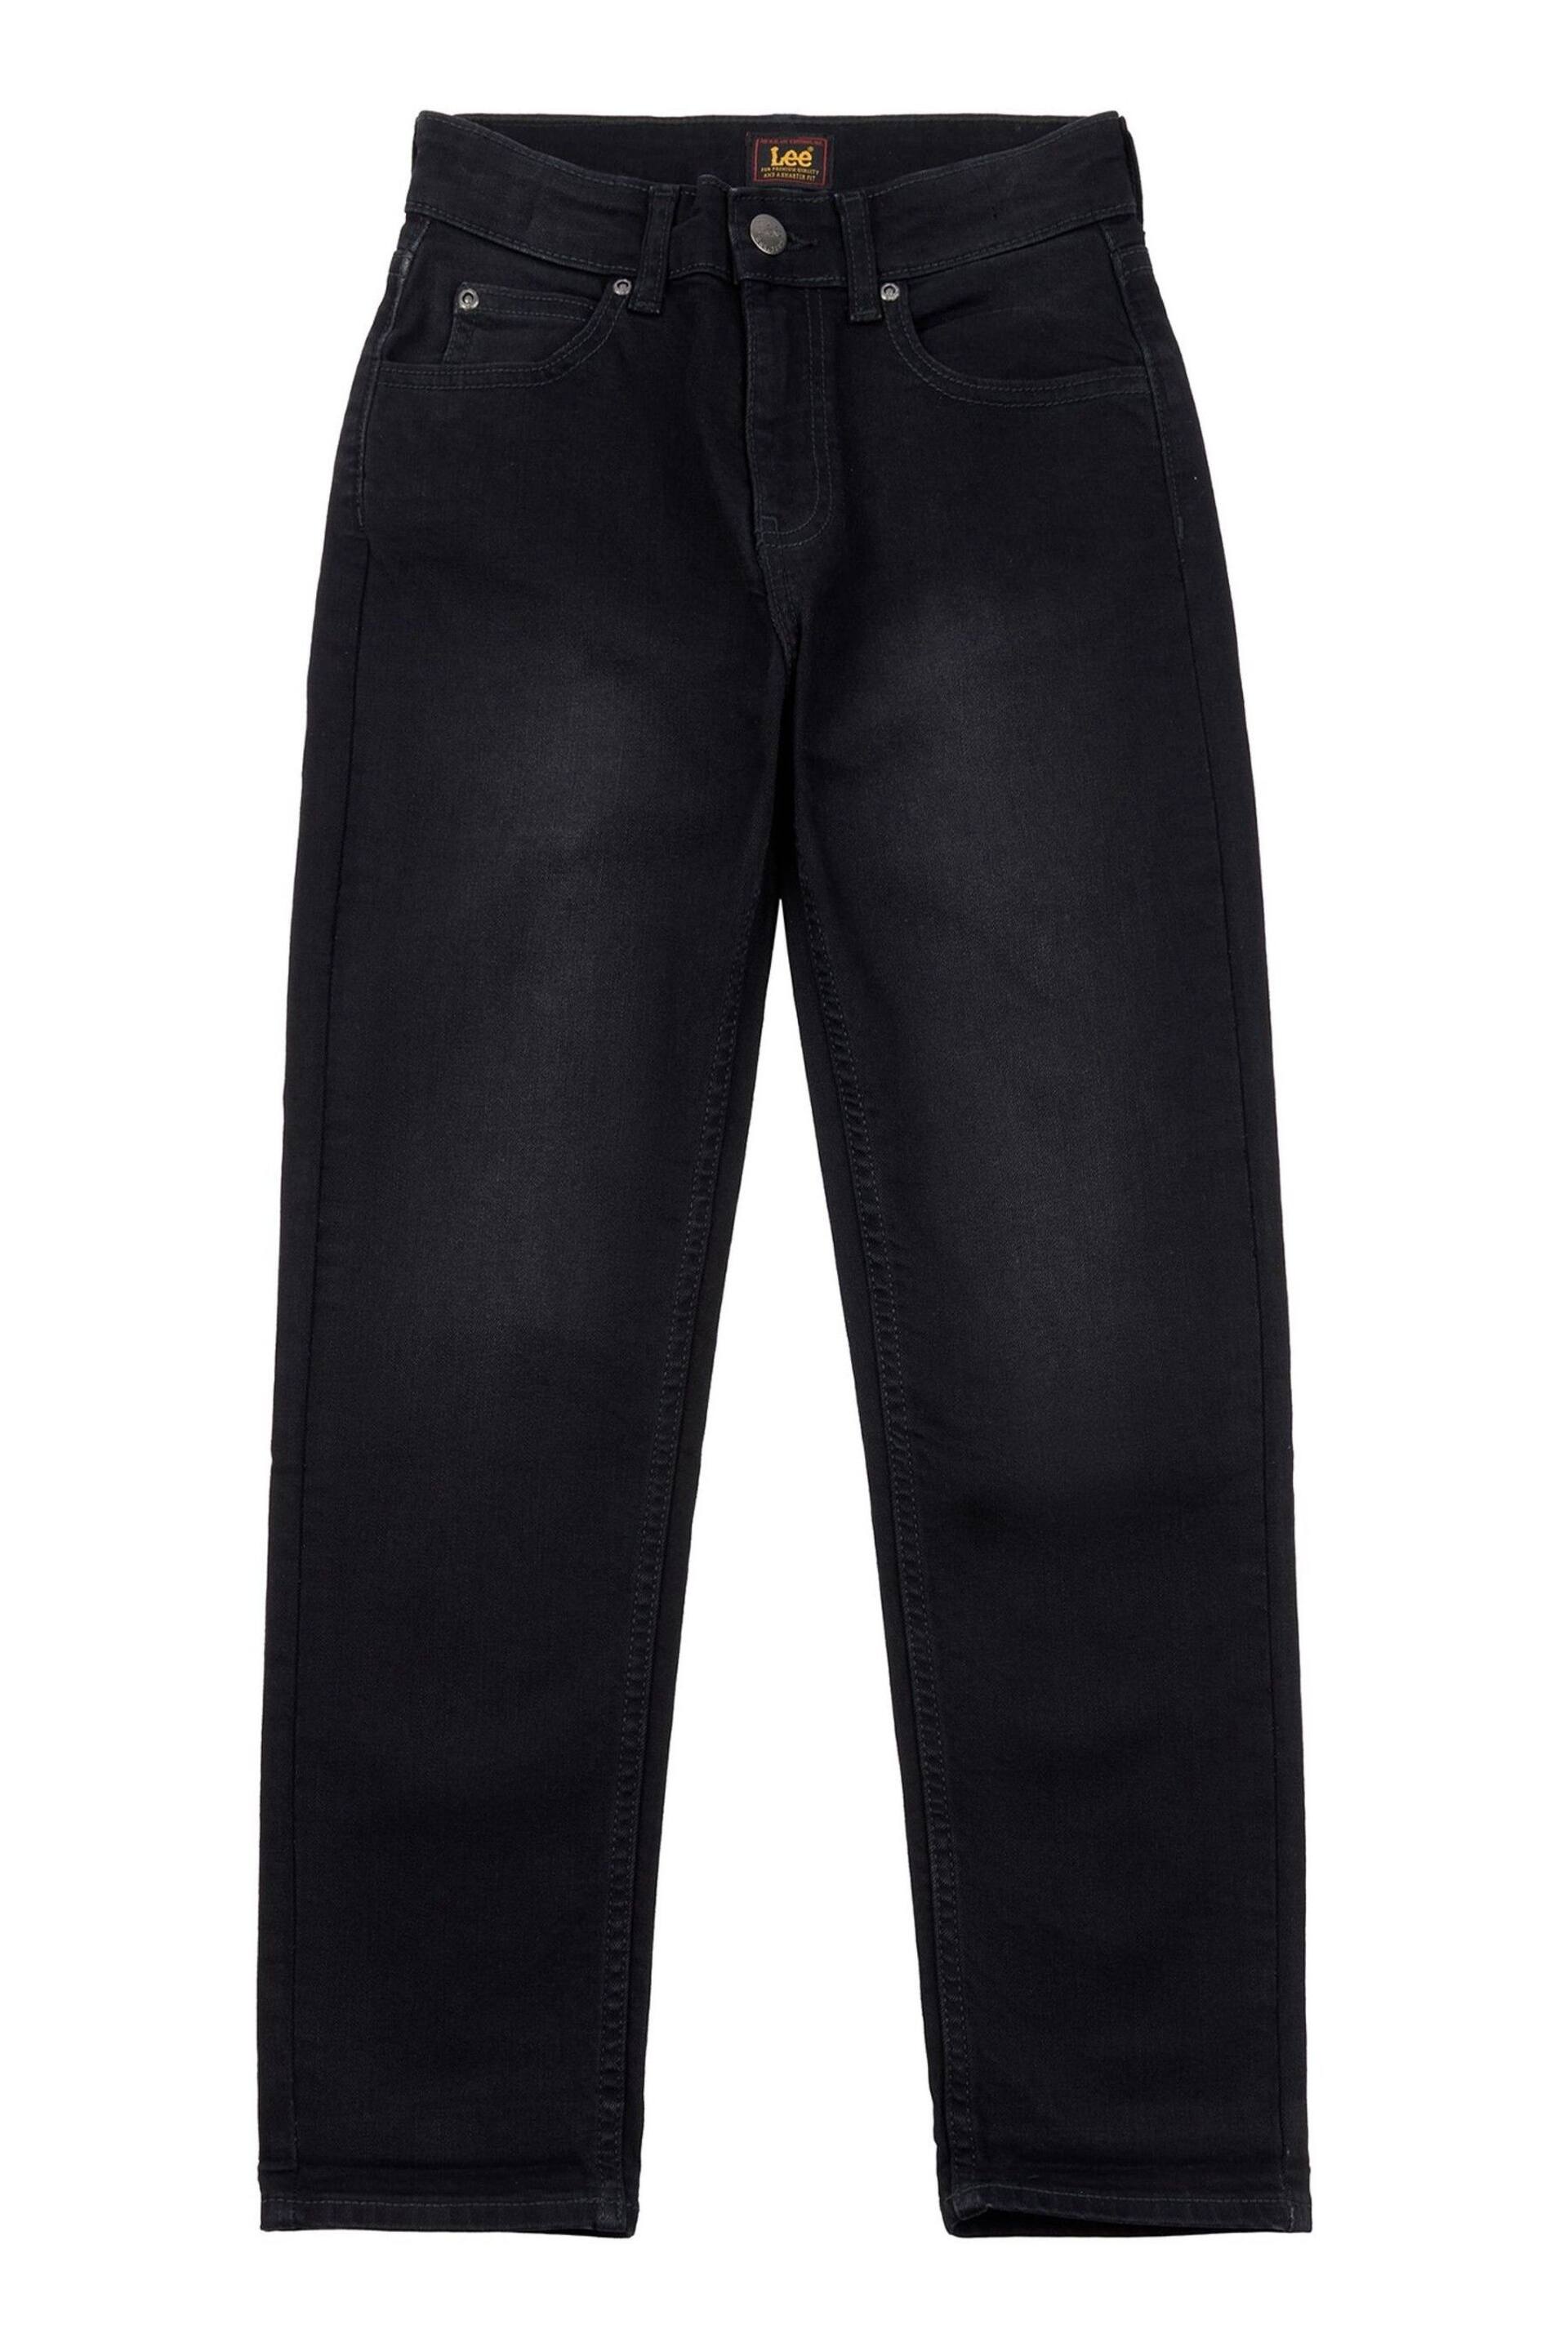 Lee Boys Relaxed Fit West Jeans - Image 7 of 7